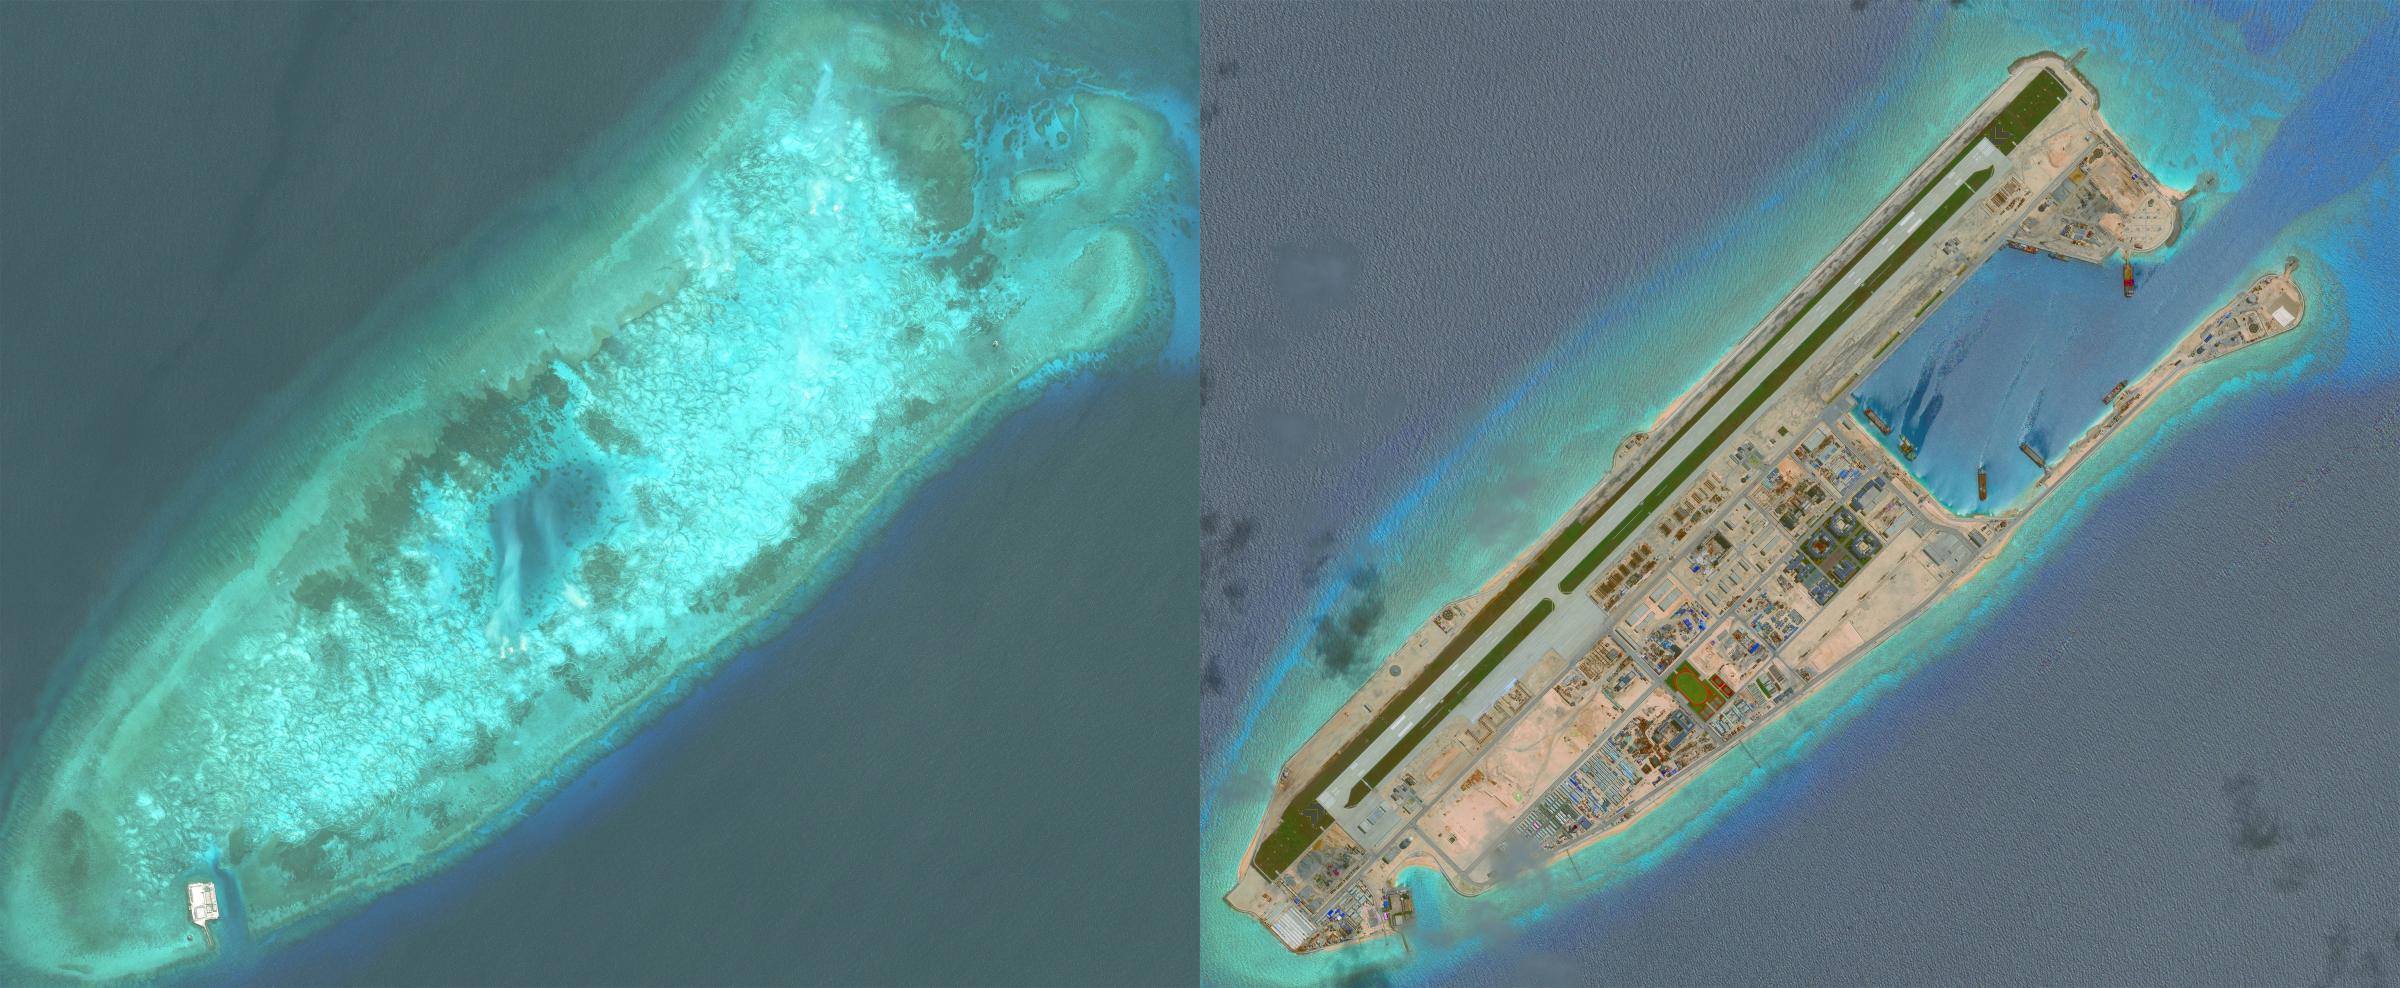 DigitalGlobe overview imagery comparing Fiery Cross Reef from May 31, 2014 to June 3, 2016.  Fiery Cross is located in the western part of the Spratly Islands group in the South China Sea.  Photo DigitalGlobe via Getty Images.